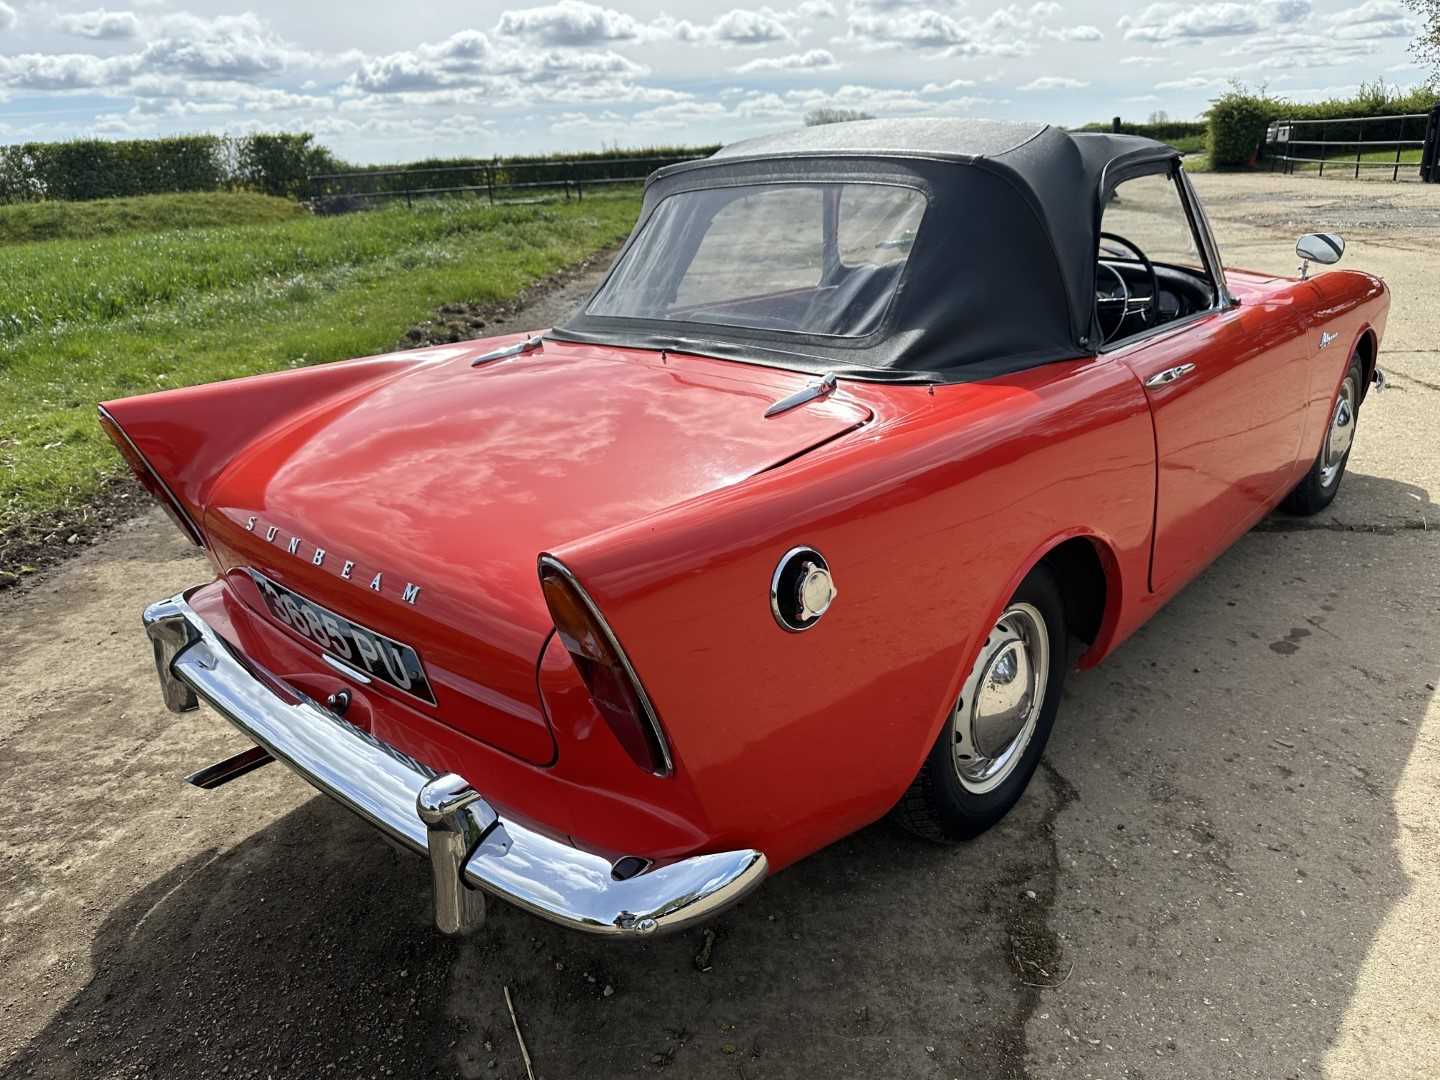 1960 Sunbeam Alpine sports convertible, 1600cc engine, manual gearbox with overdrive, reg. no. 3685 - Image 9 of 30